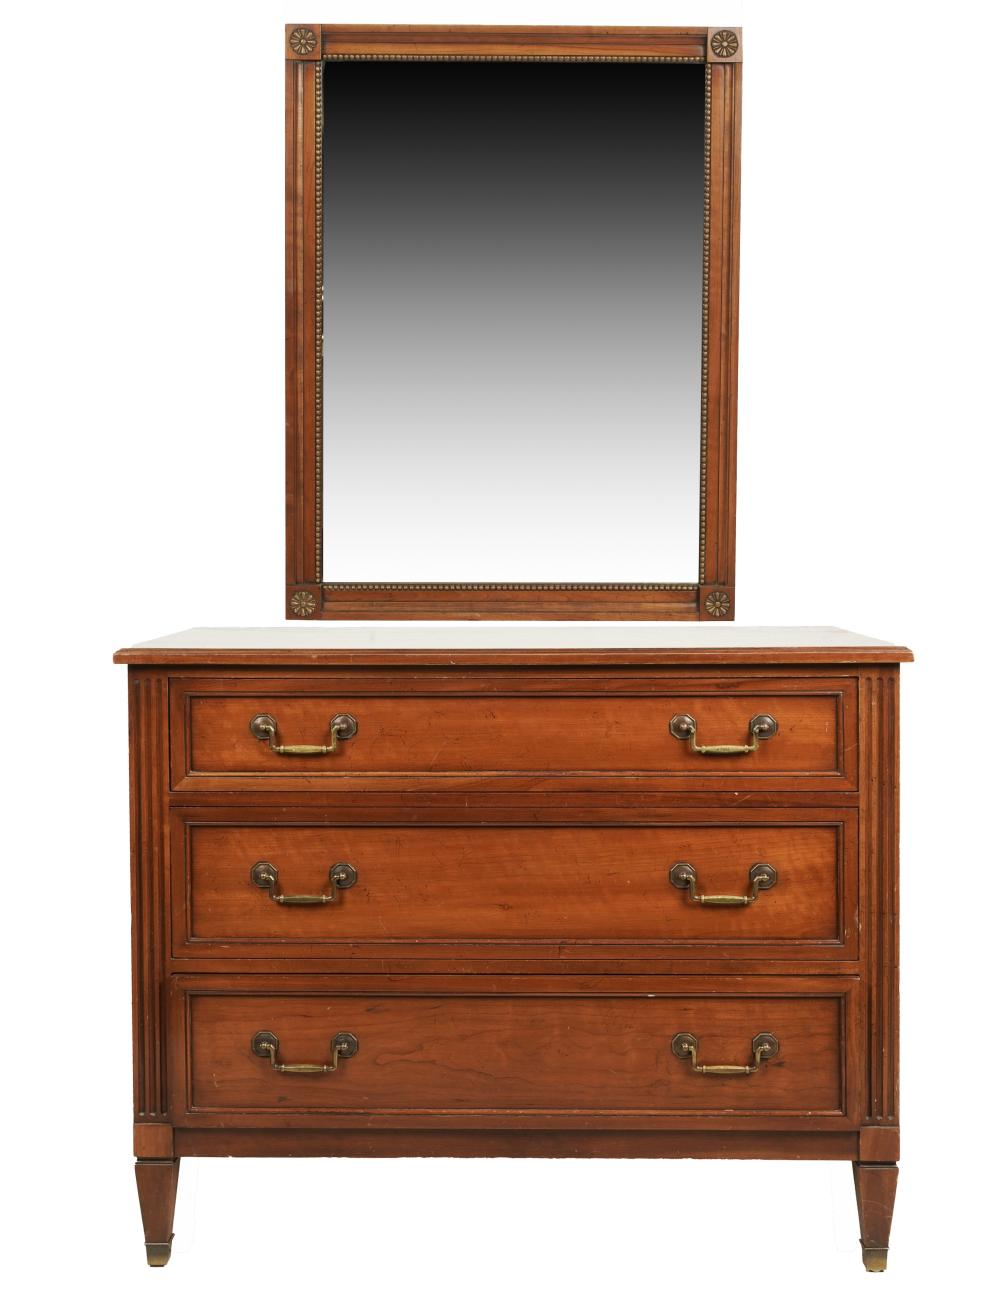 KINDEL CHEST OF DRAWERS AND WALL 303e1c